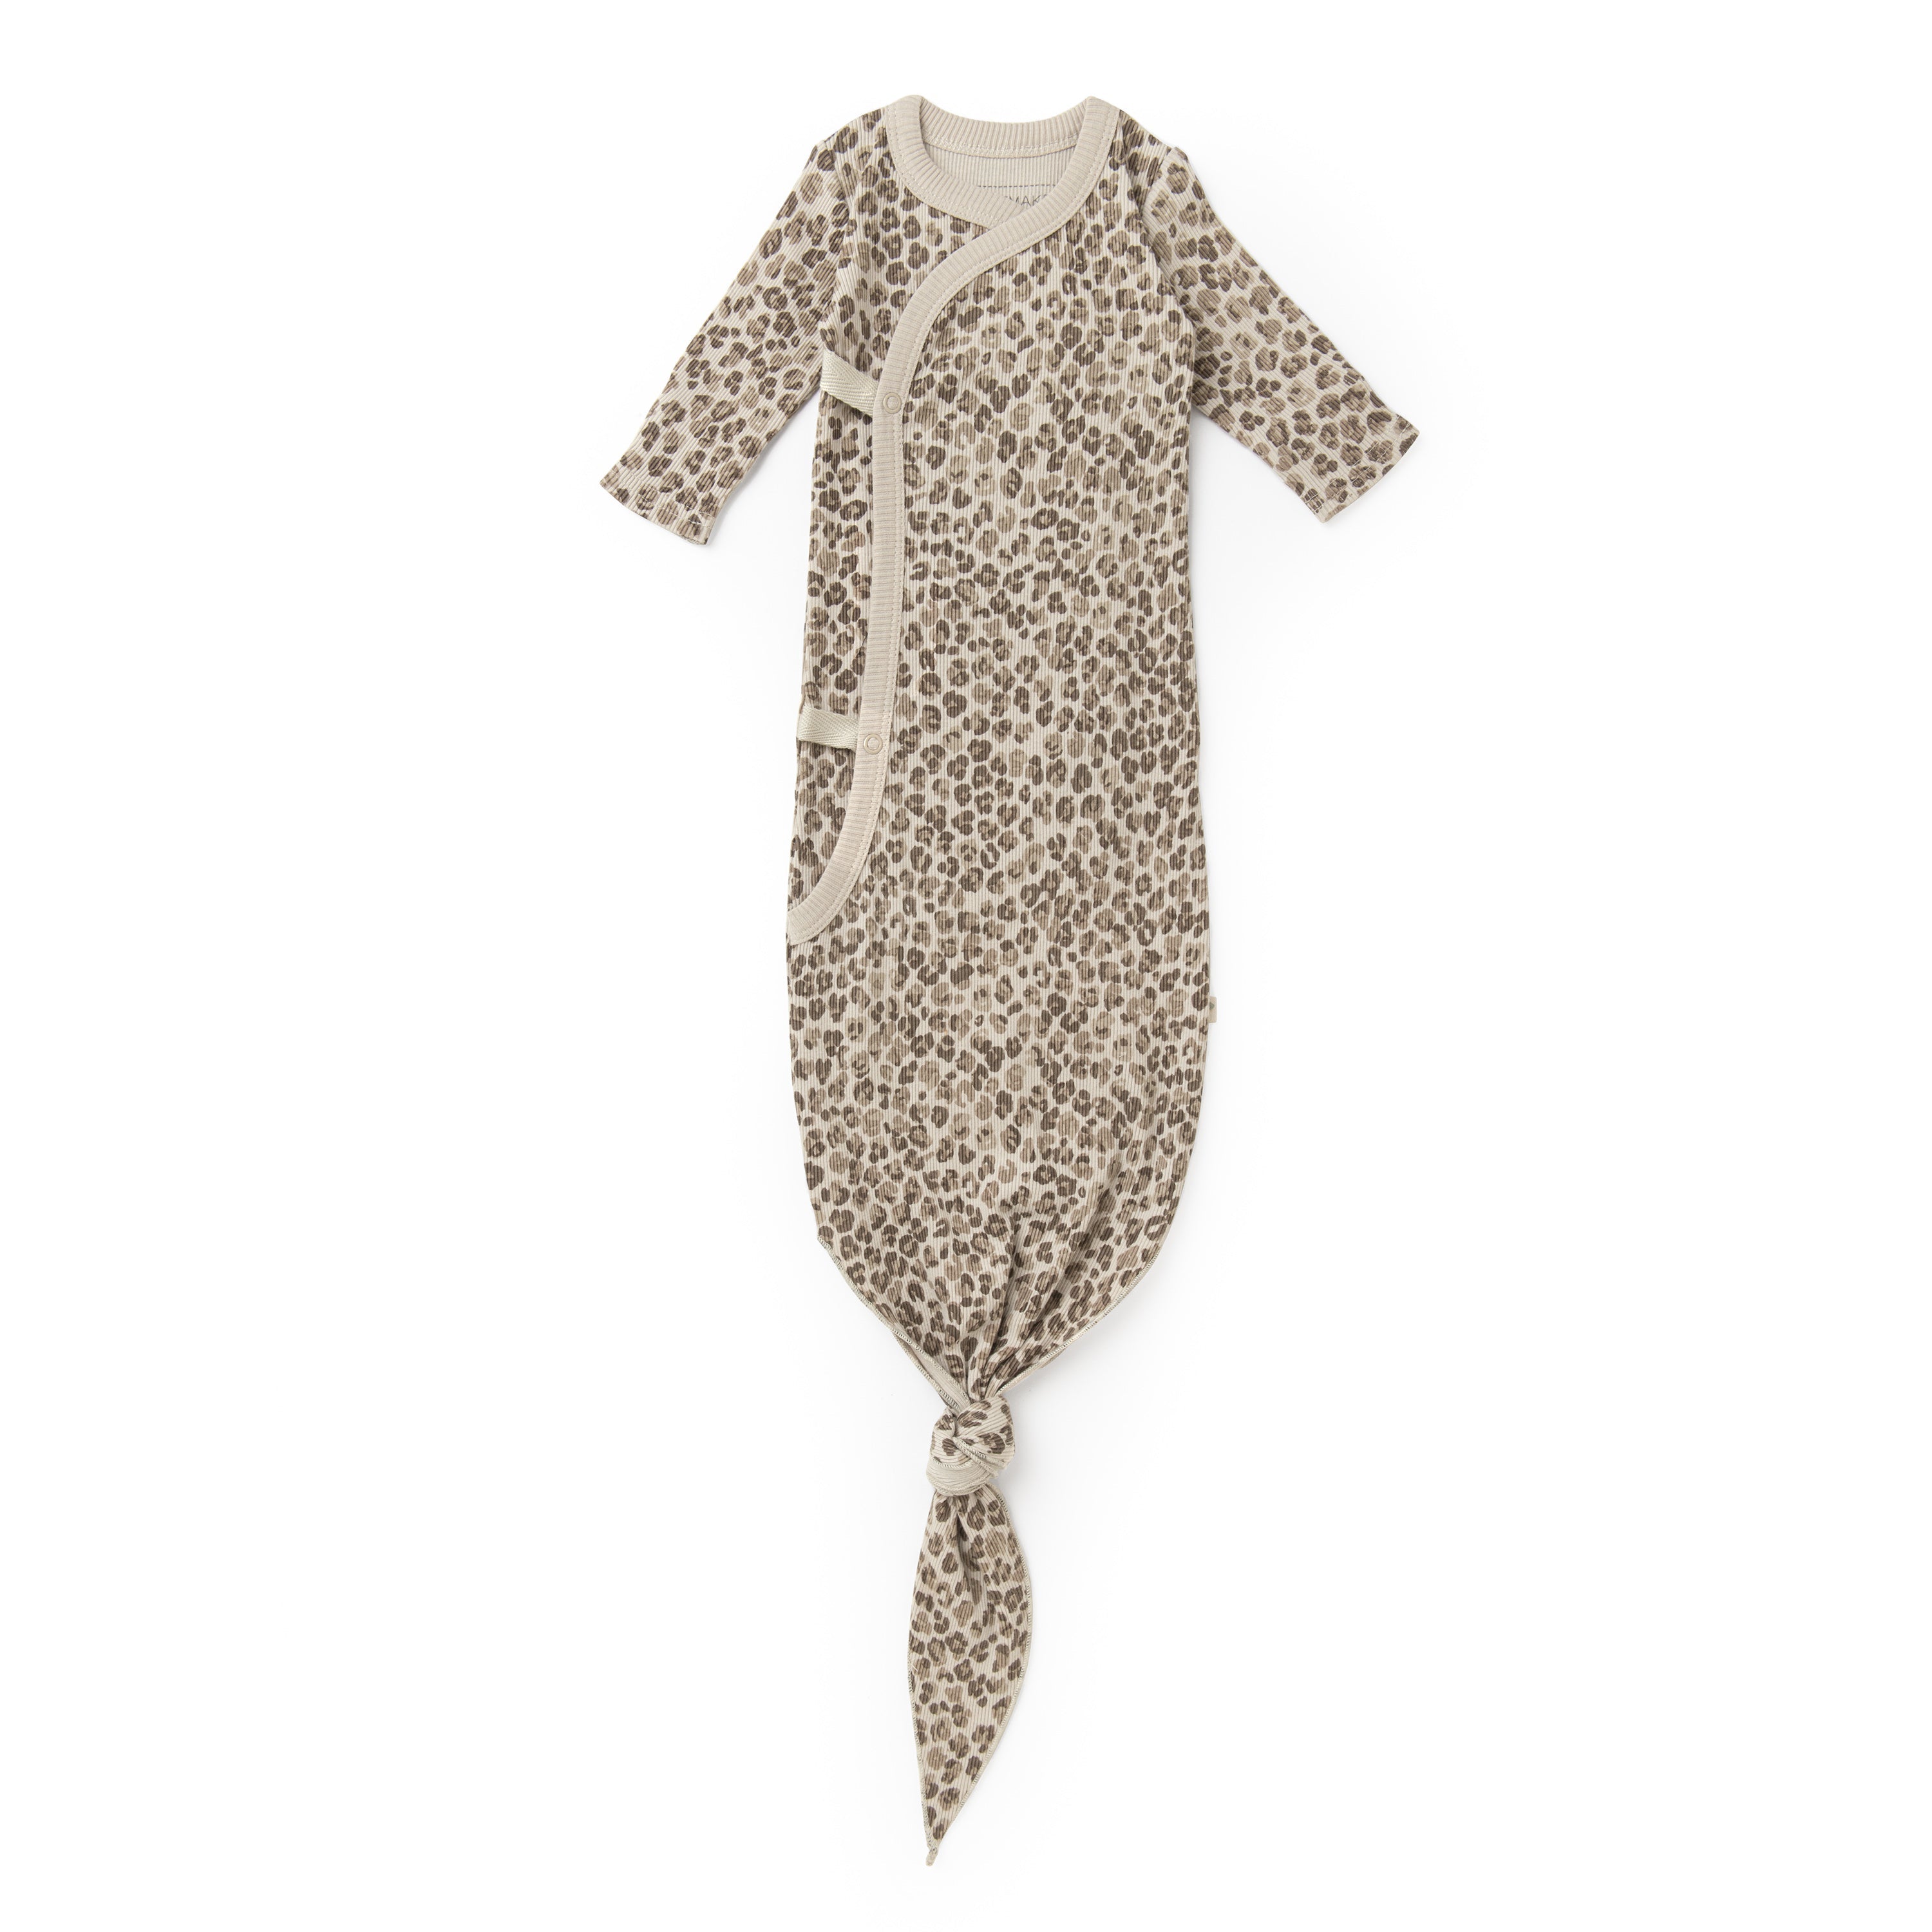 A Organic Baby Organic Kimono Knotted Sleep Gown - Spotted featuring a leopard print design laid flat on a white background.